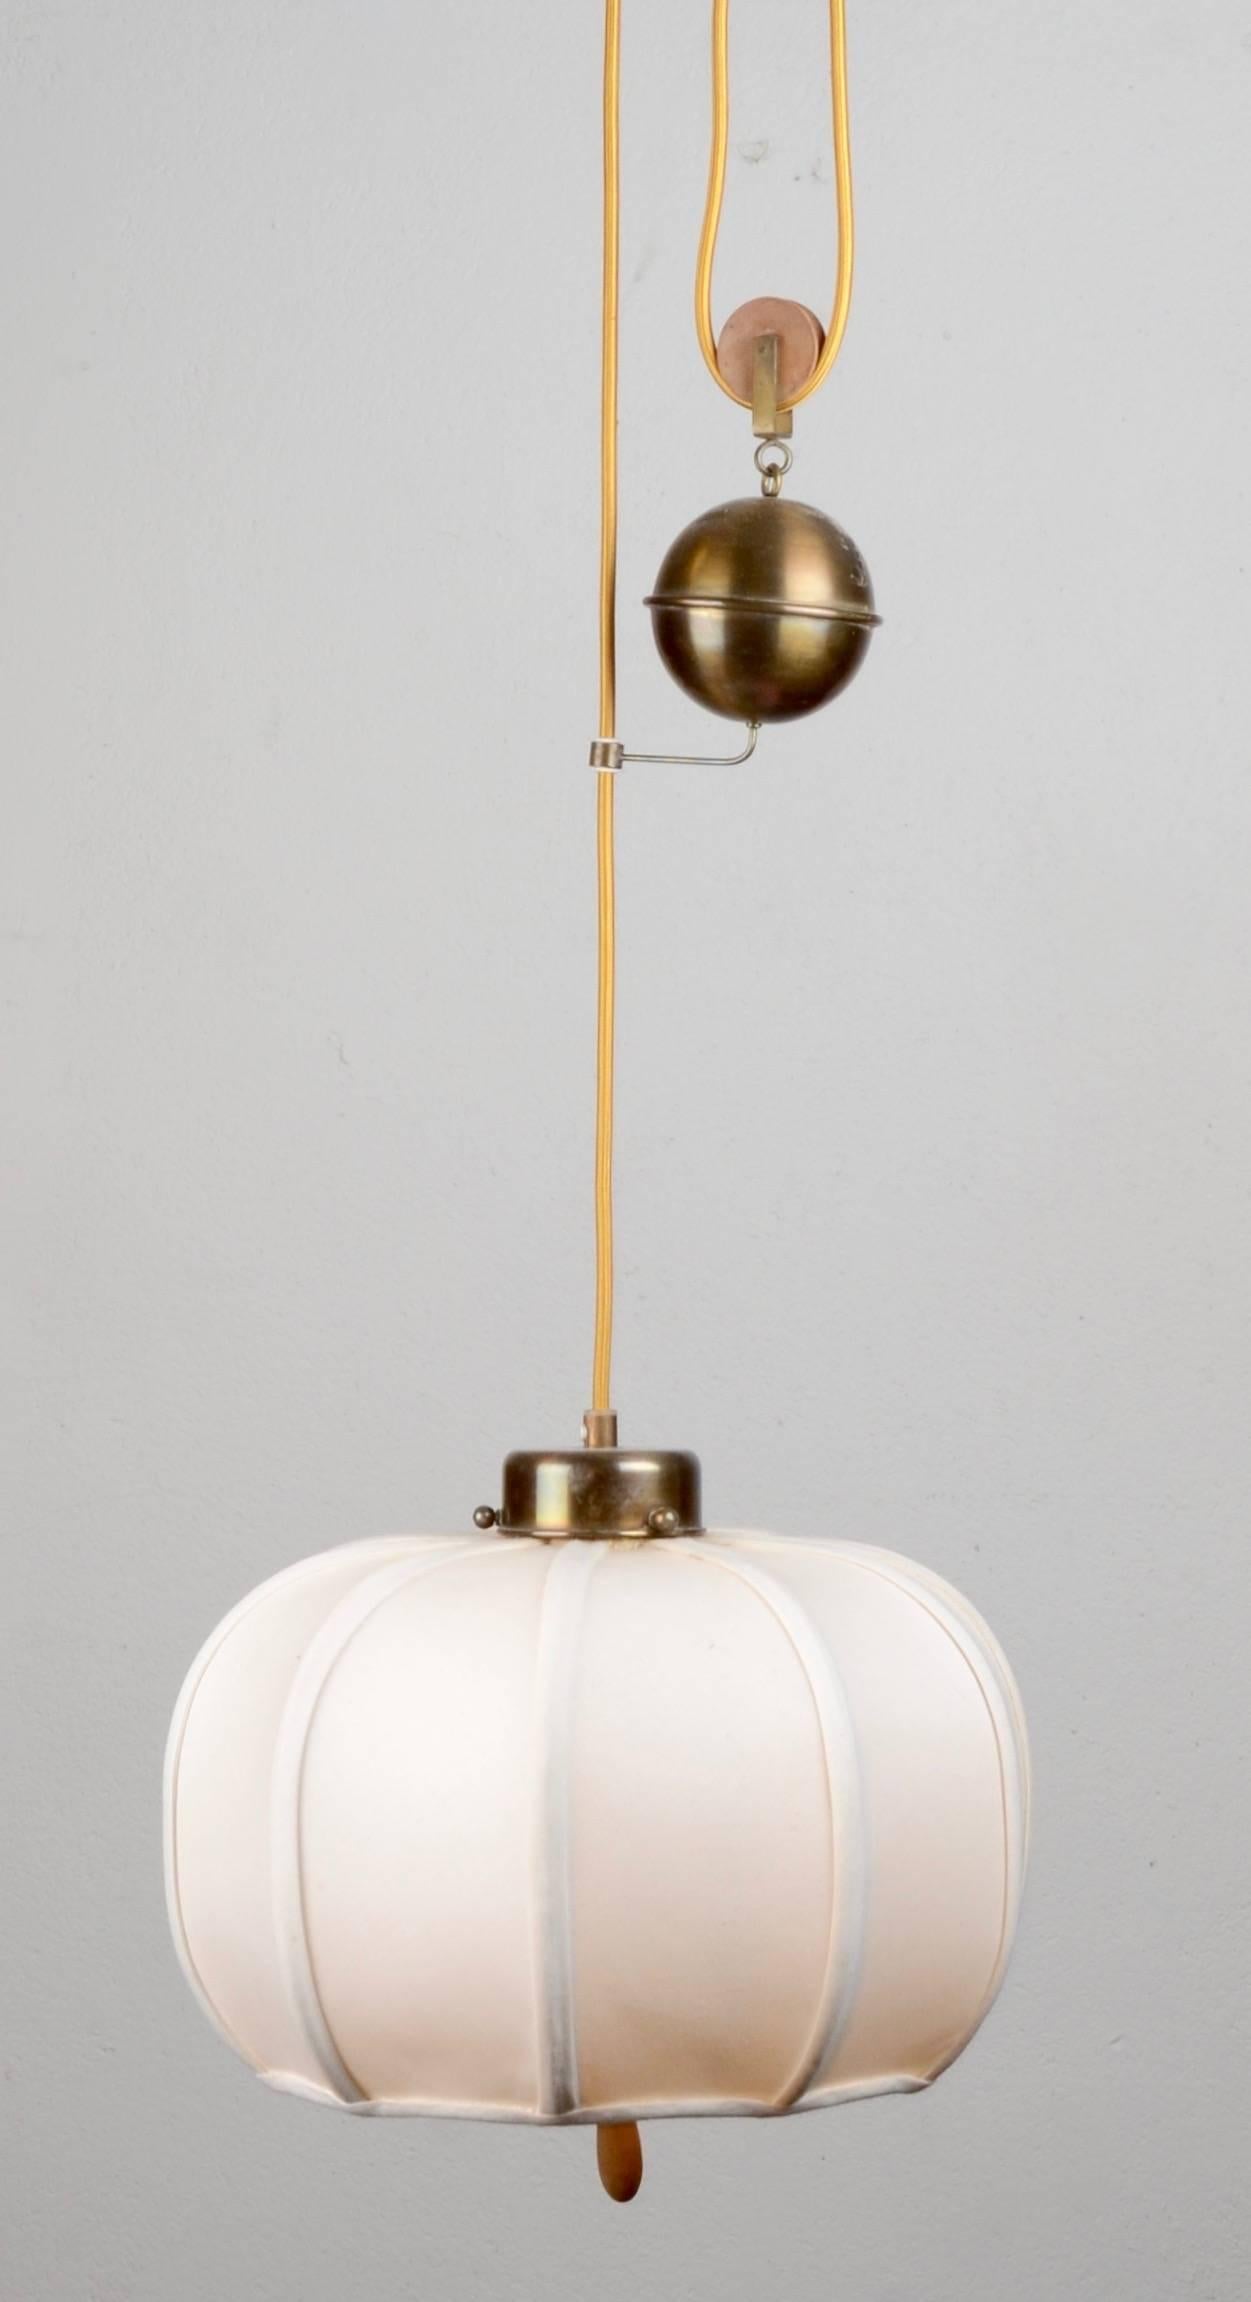 Pendant designed by Josef Frank for Firma Svenskt Tenn, Sweden, 1930s-1940s. Easy to adjust the height of the lamp with the help of the weight.